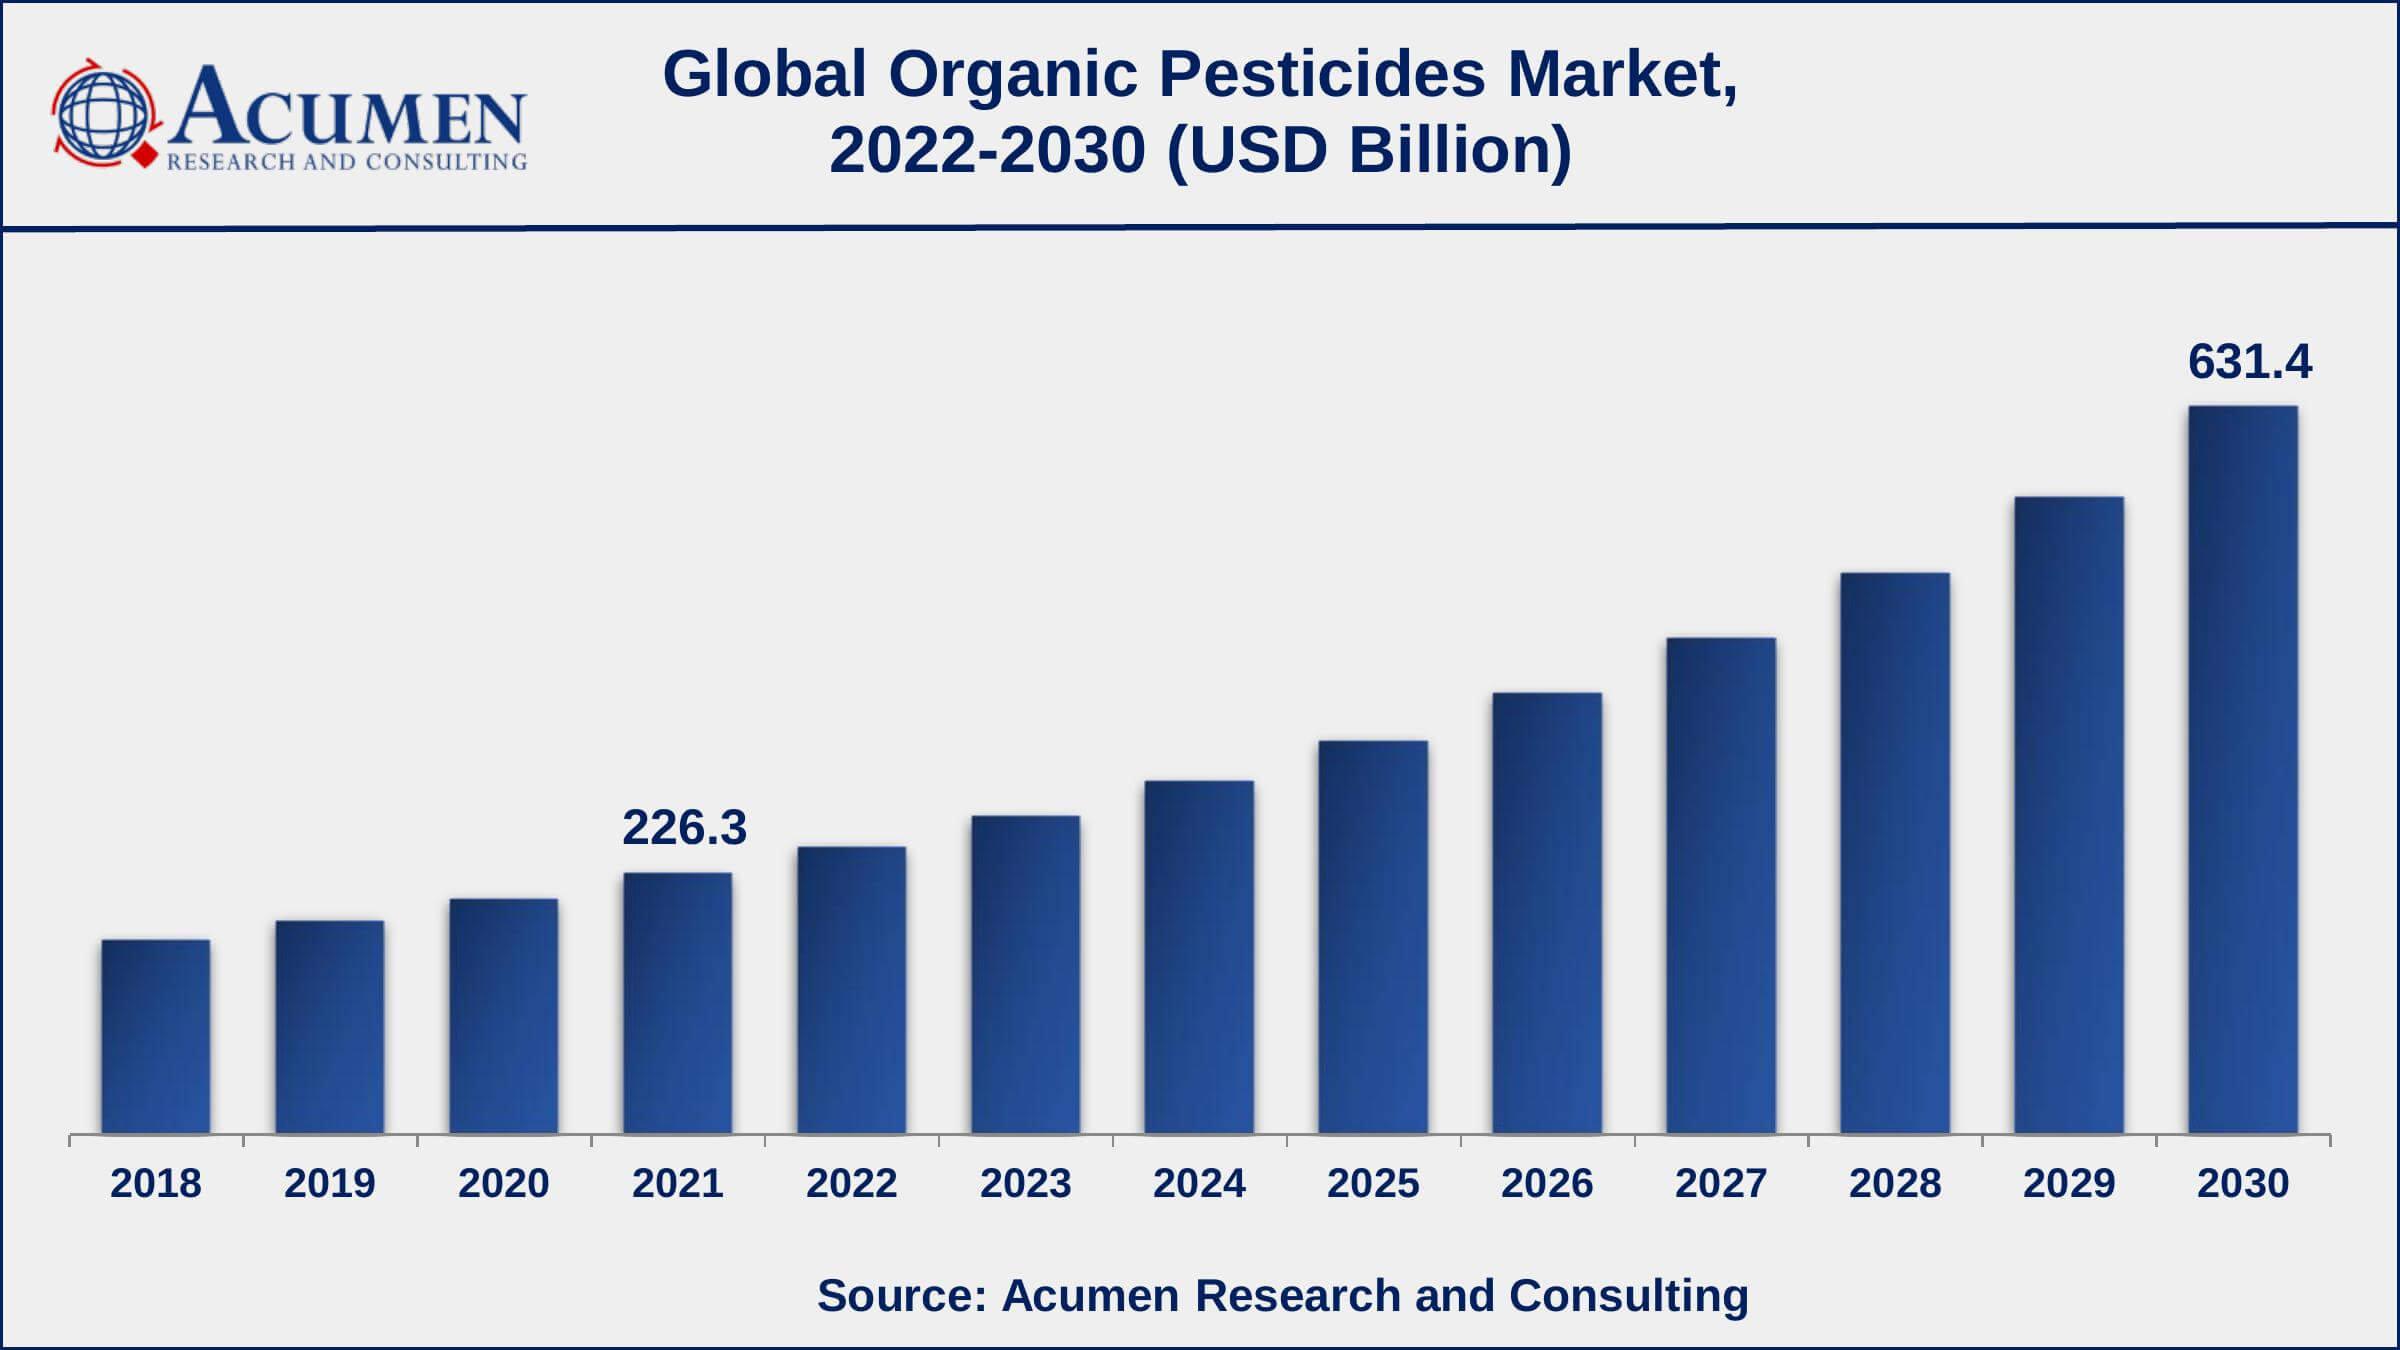 Asia-Pacific organic pesticides market growth will record a CAGR of more than 13% from 2022 to 2030